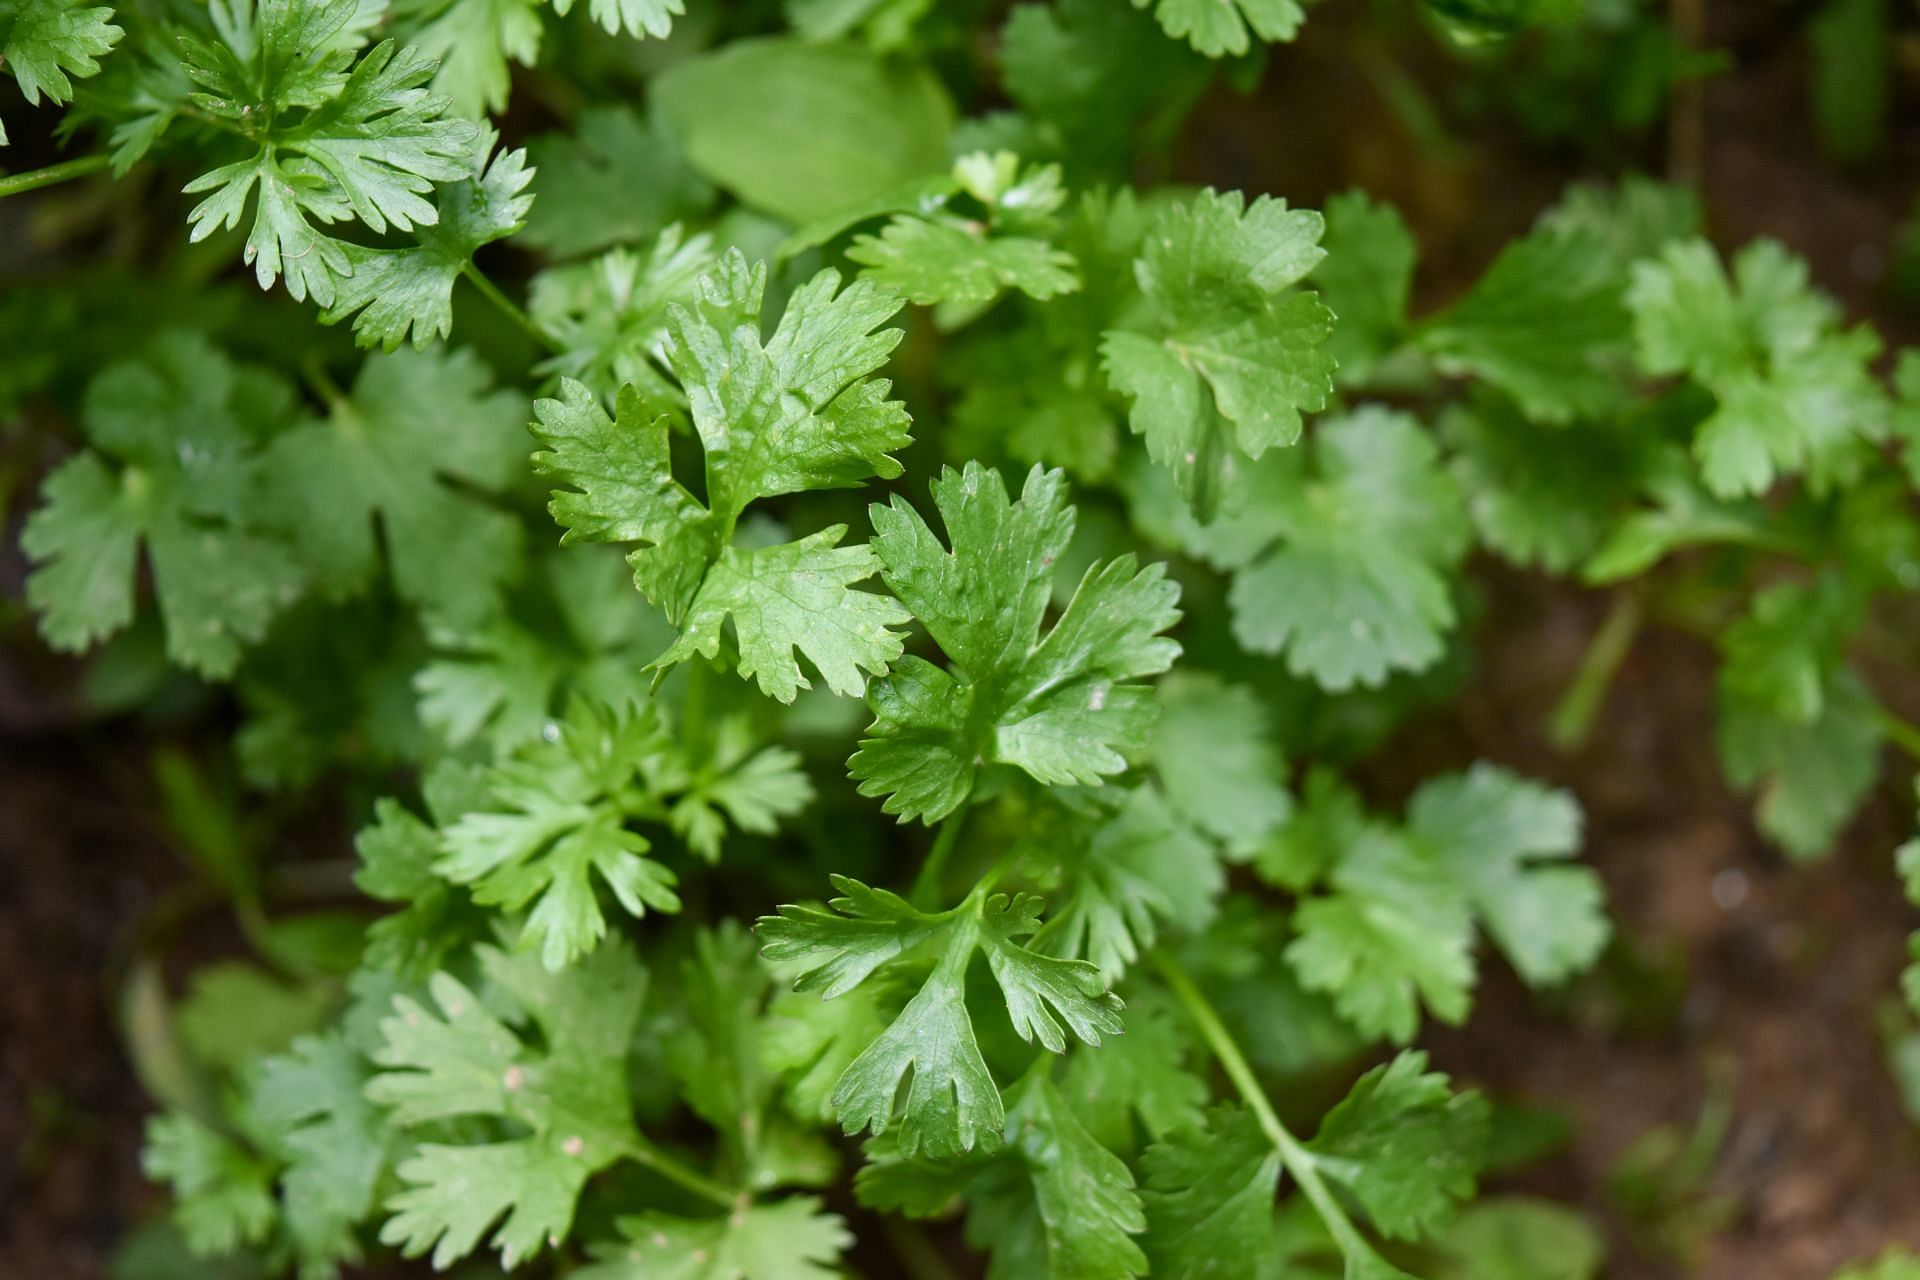 Coriander seeds come from this plant. (Image by Chandan Chaurasia/Unsplash)